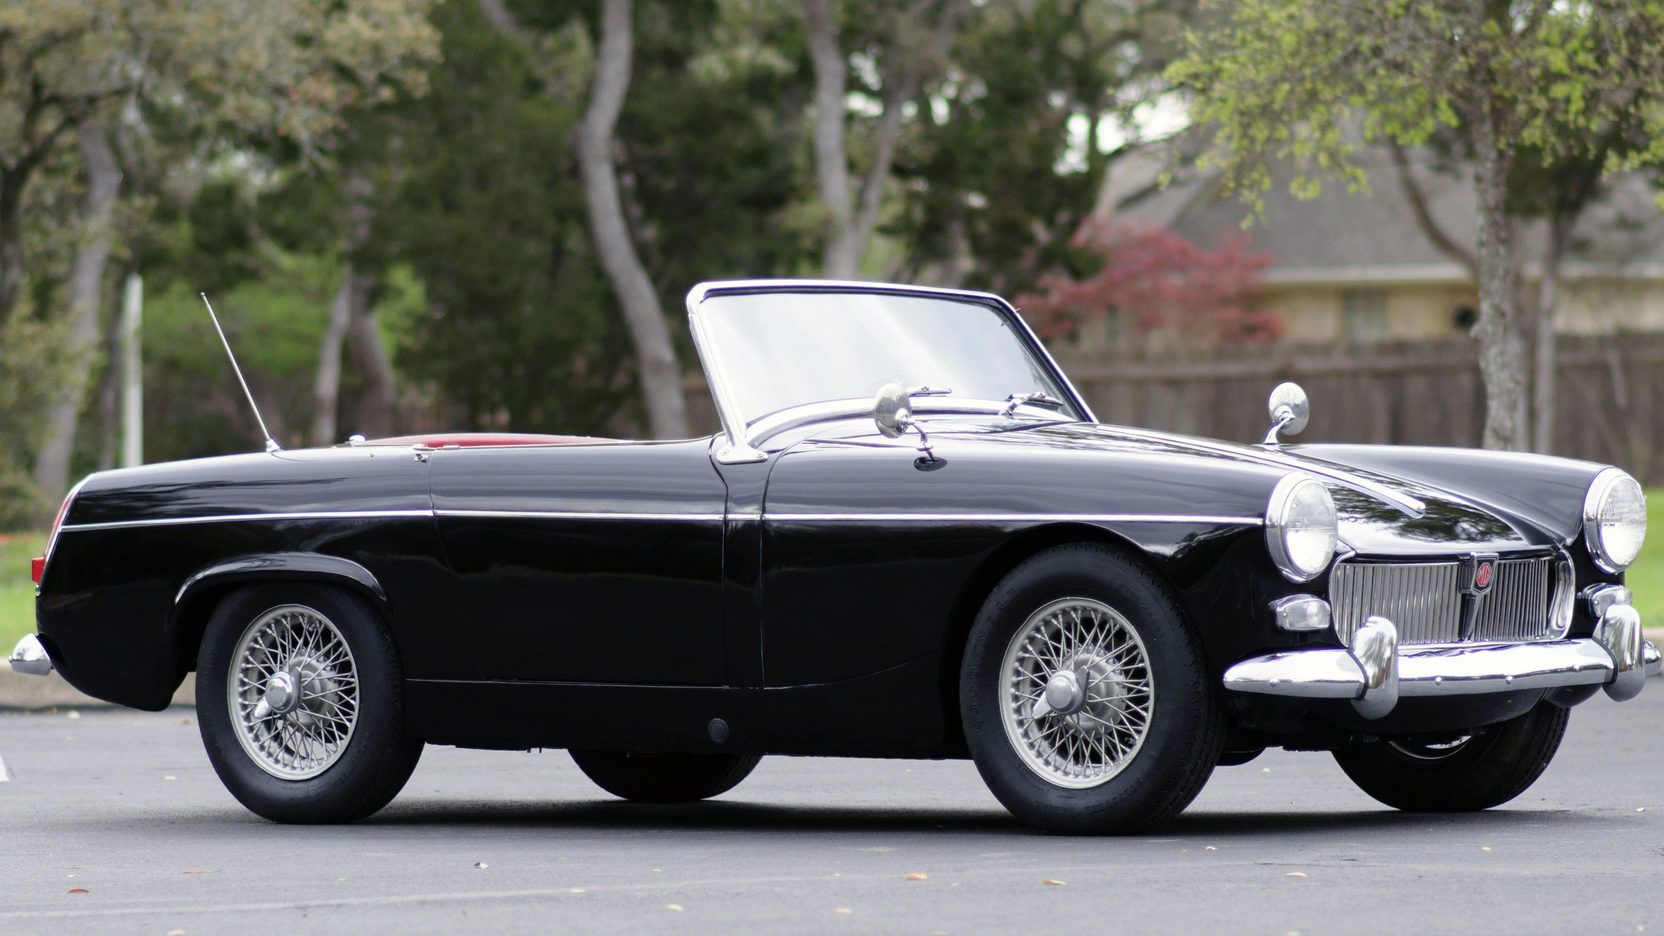 1963 MG Midget Convertible, black, front and side